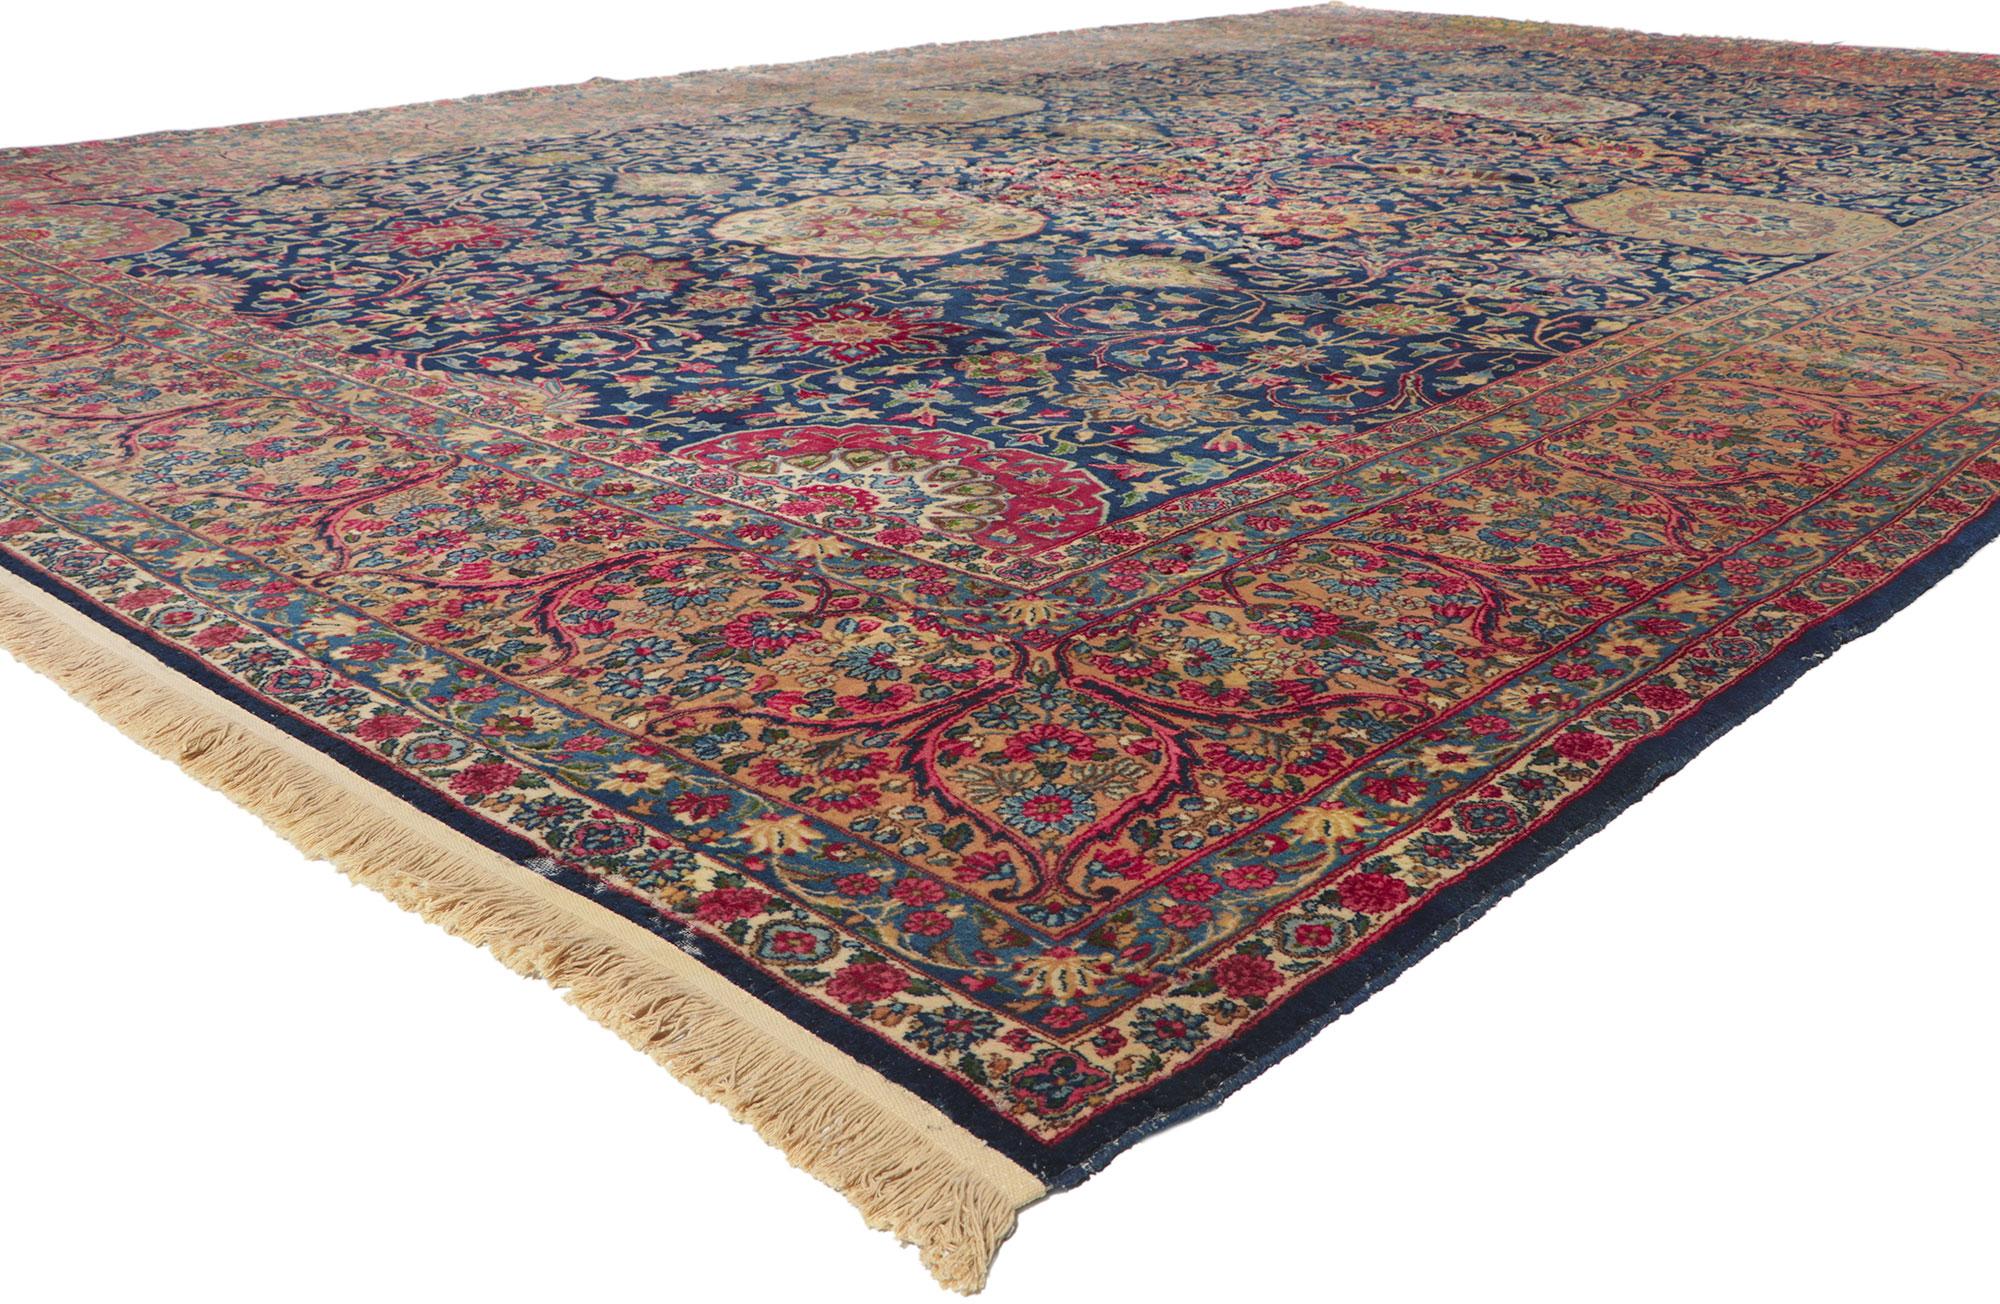 78354 Antique Persian Kerman Rug, 11'02 x 16'07. With its palatial dimensions, incredible detail and texture, this hand knotted wool antique Persian Kerman rug is a captivating vision of woven beauty. The timeless botanical design and refined color